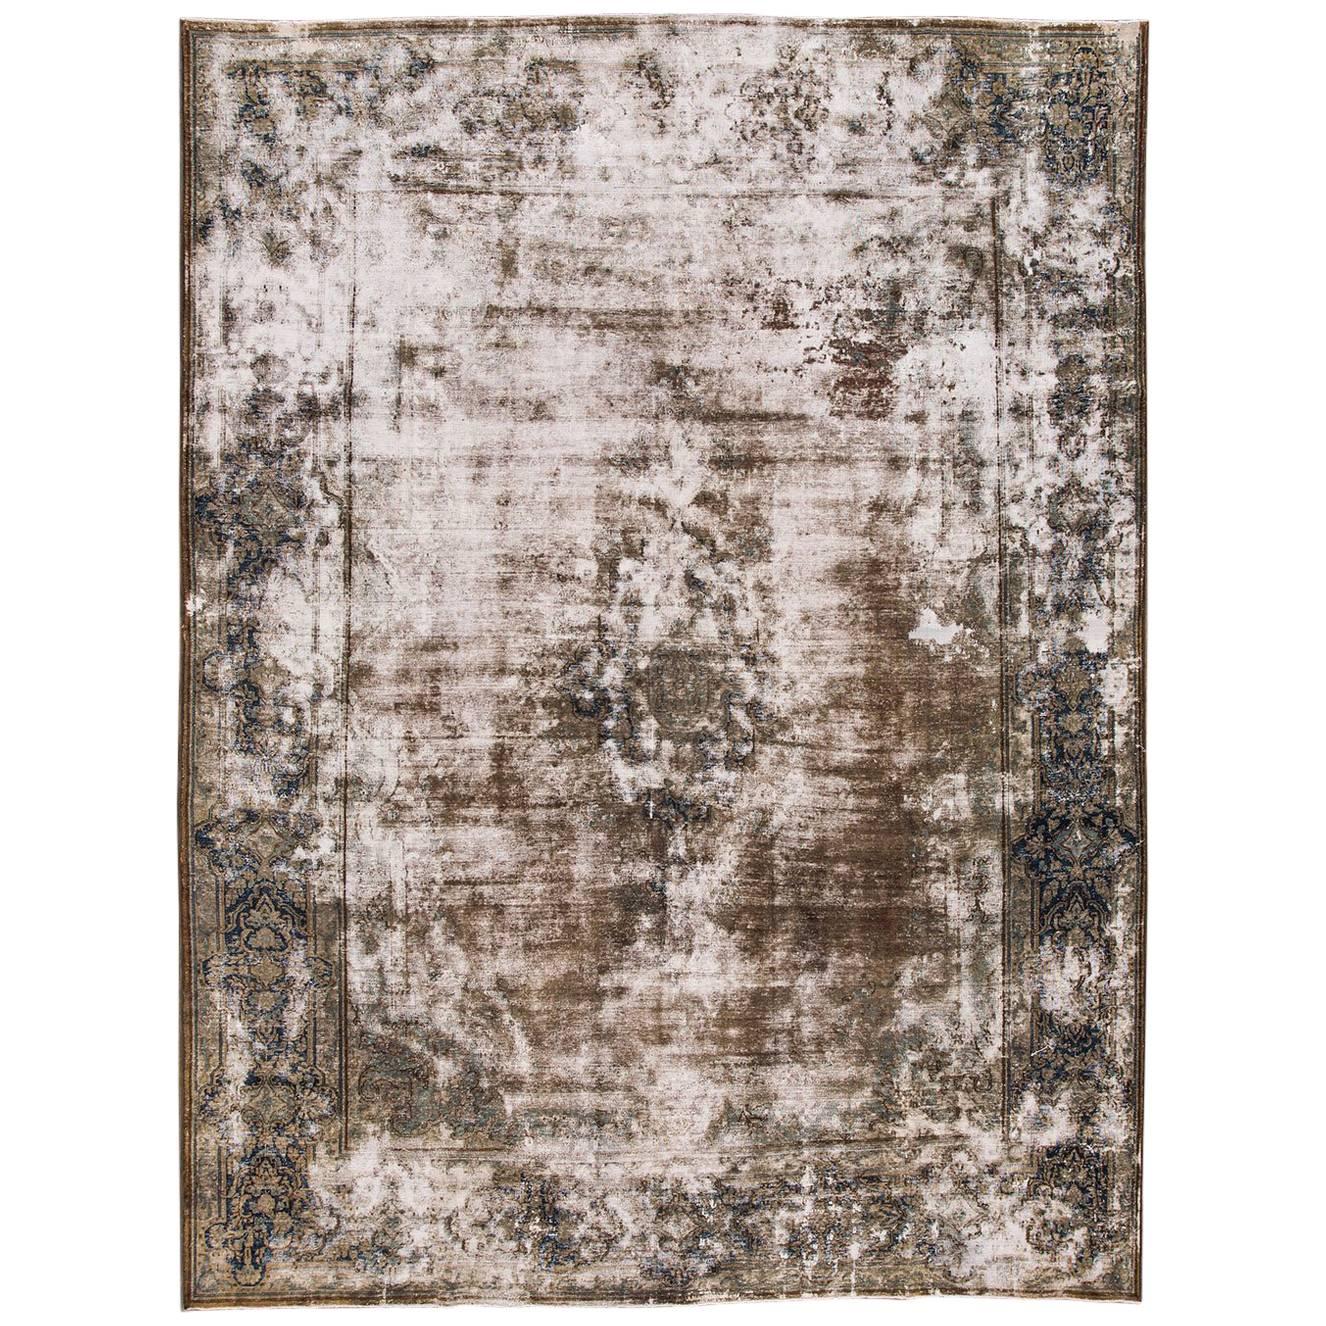 Antique Distressed Gray Persian Kerman Rug, 10x13.03 For Sale